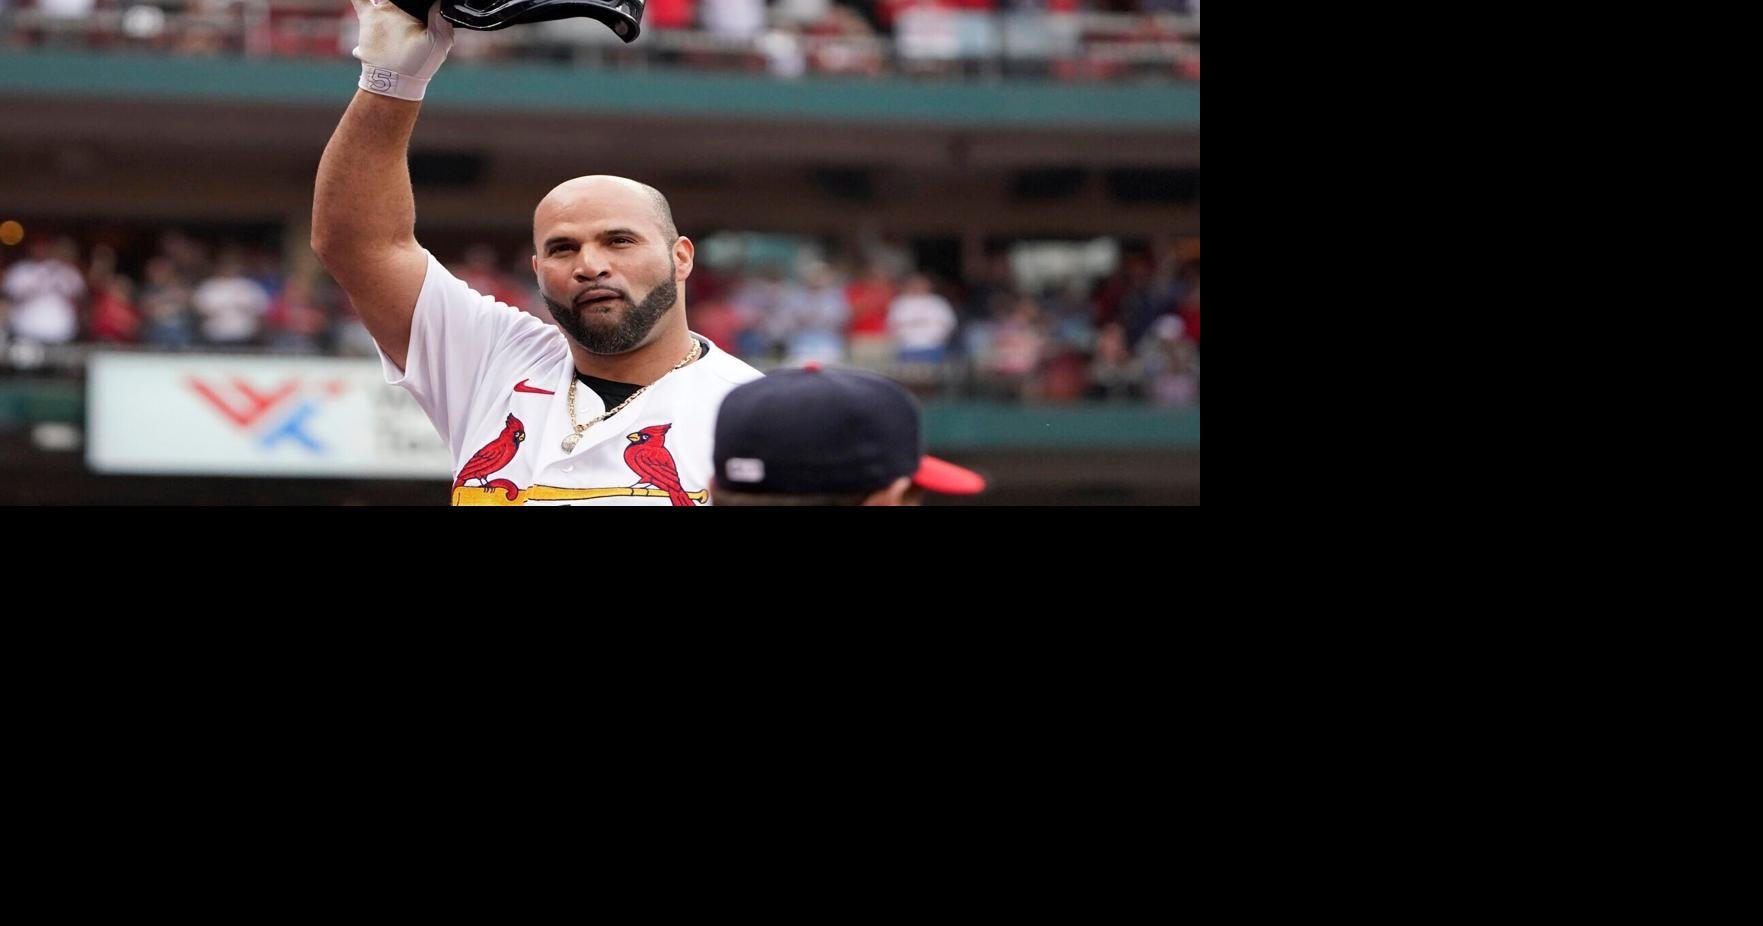 Albert Pujols looks at ARod's record eye to eye with homer 696